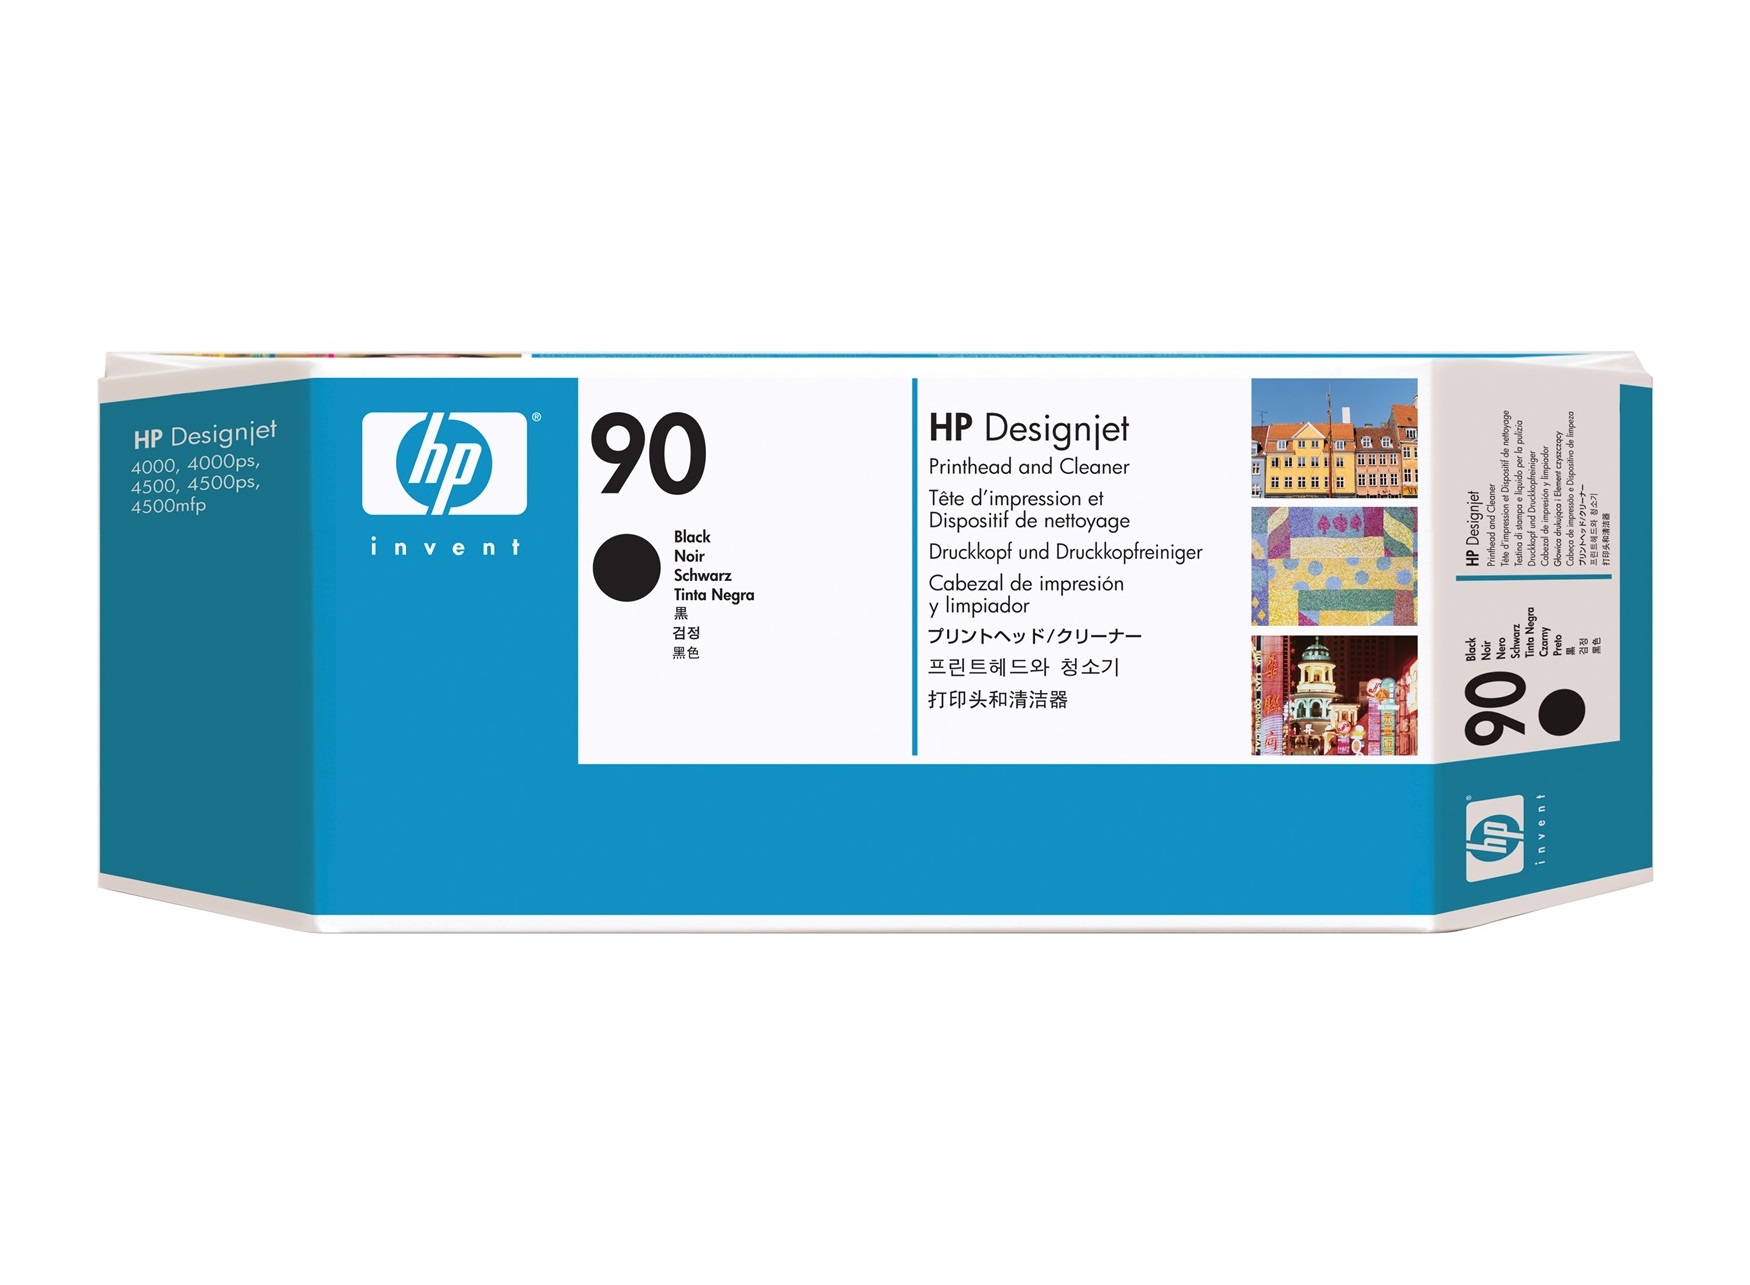 Related to HP DESIGNJET 4000PS: C5054A